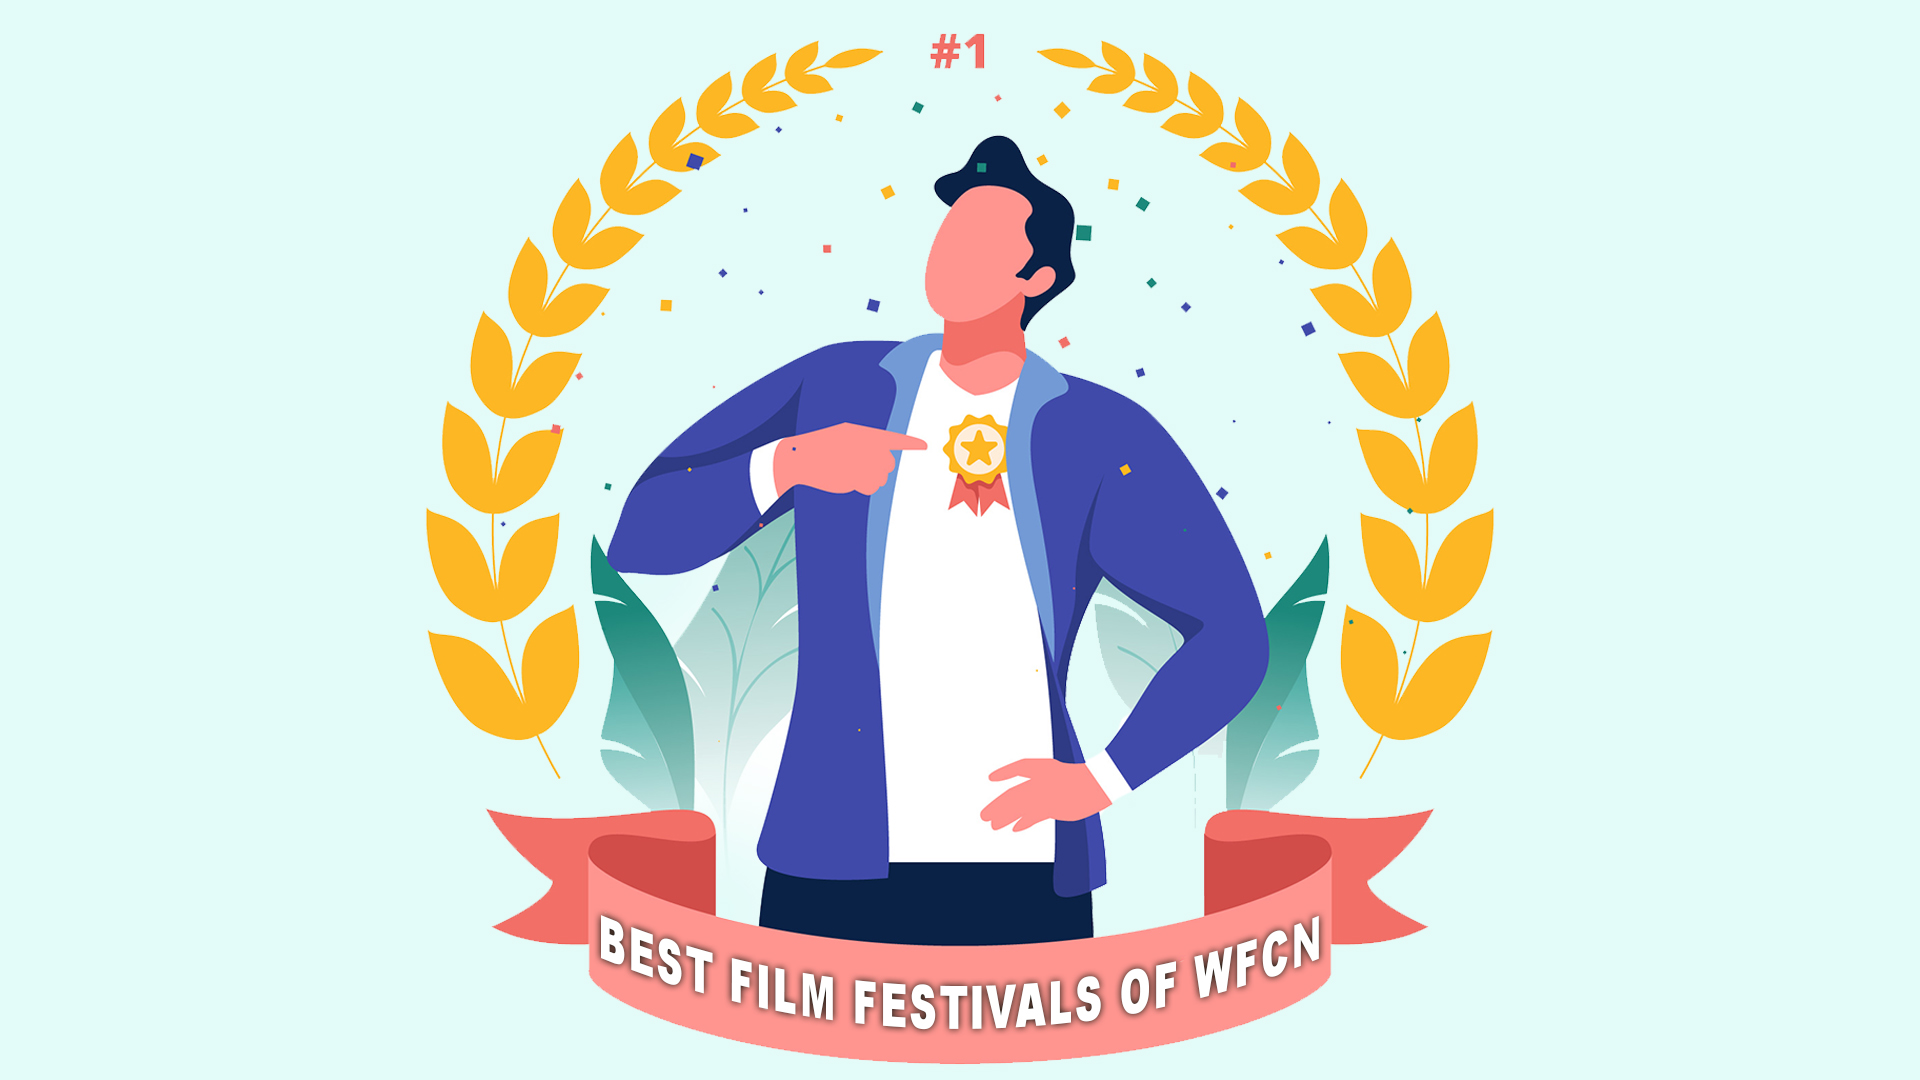 Film Festivals that are best on WFCN